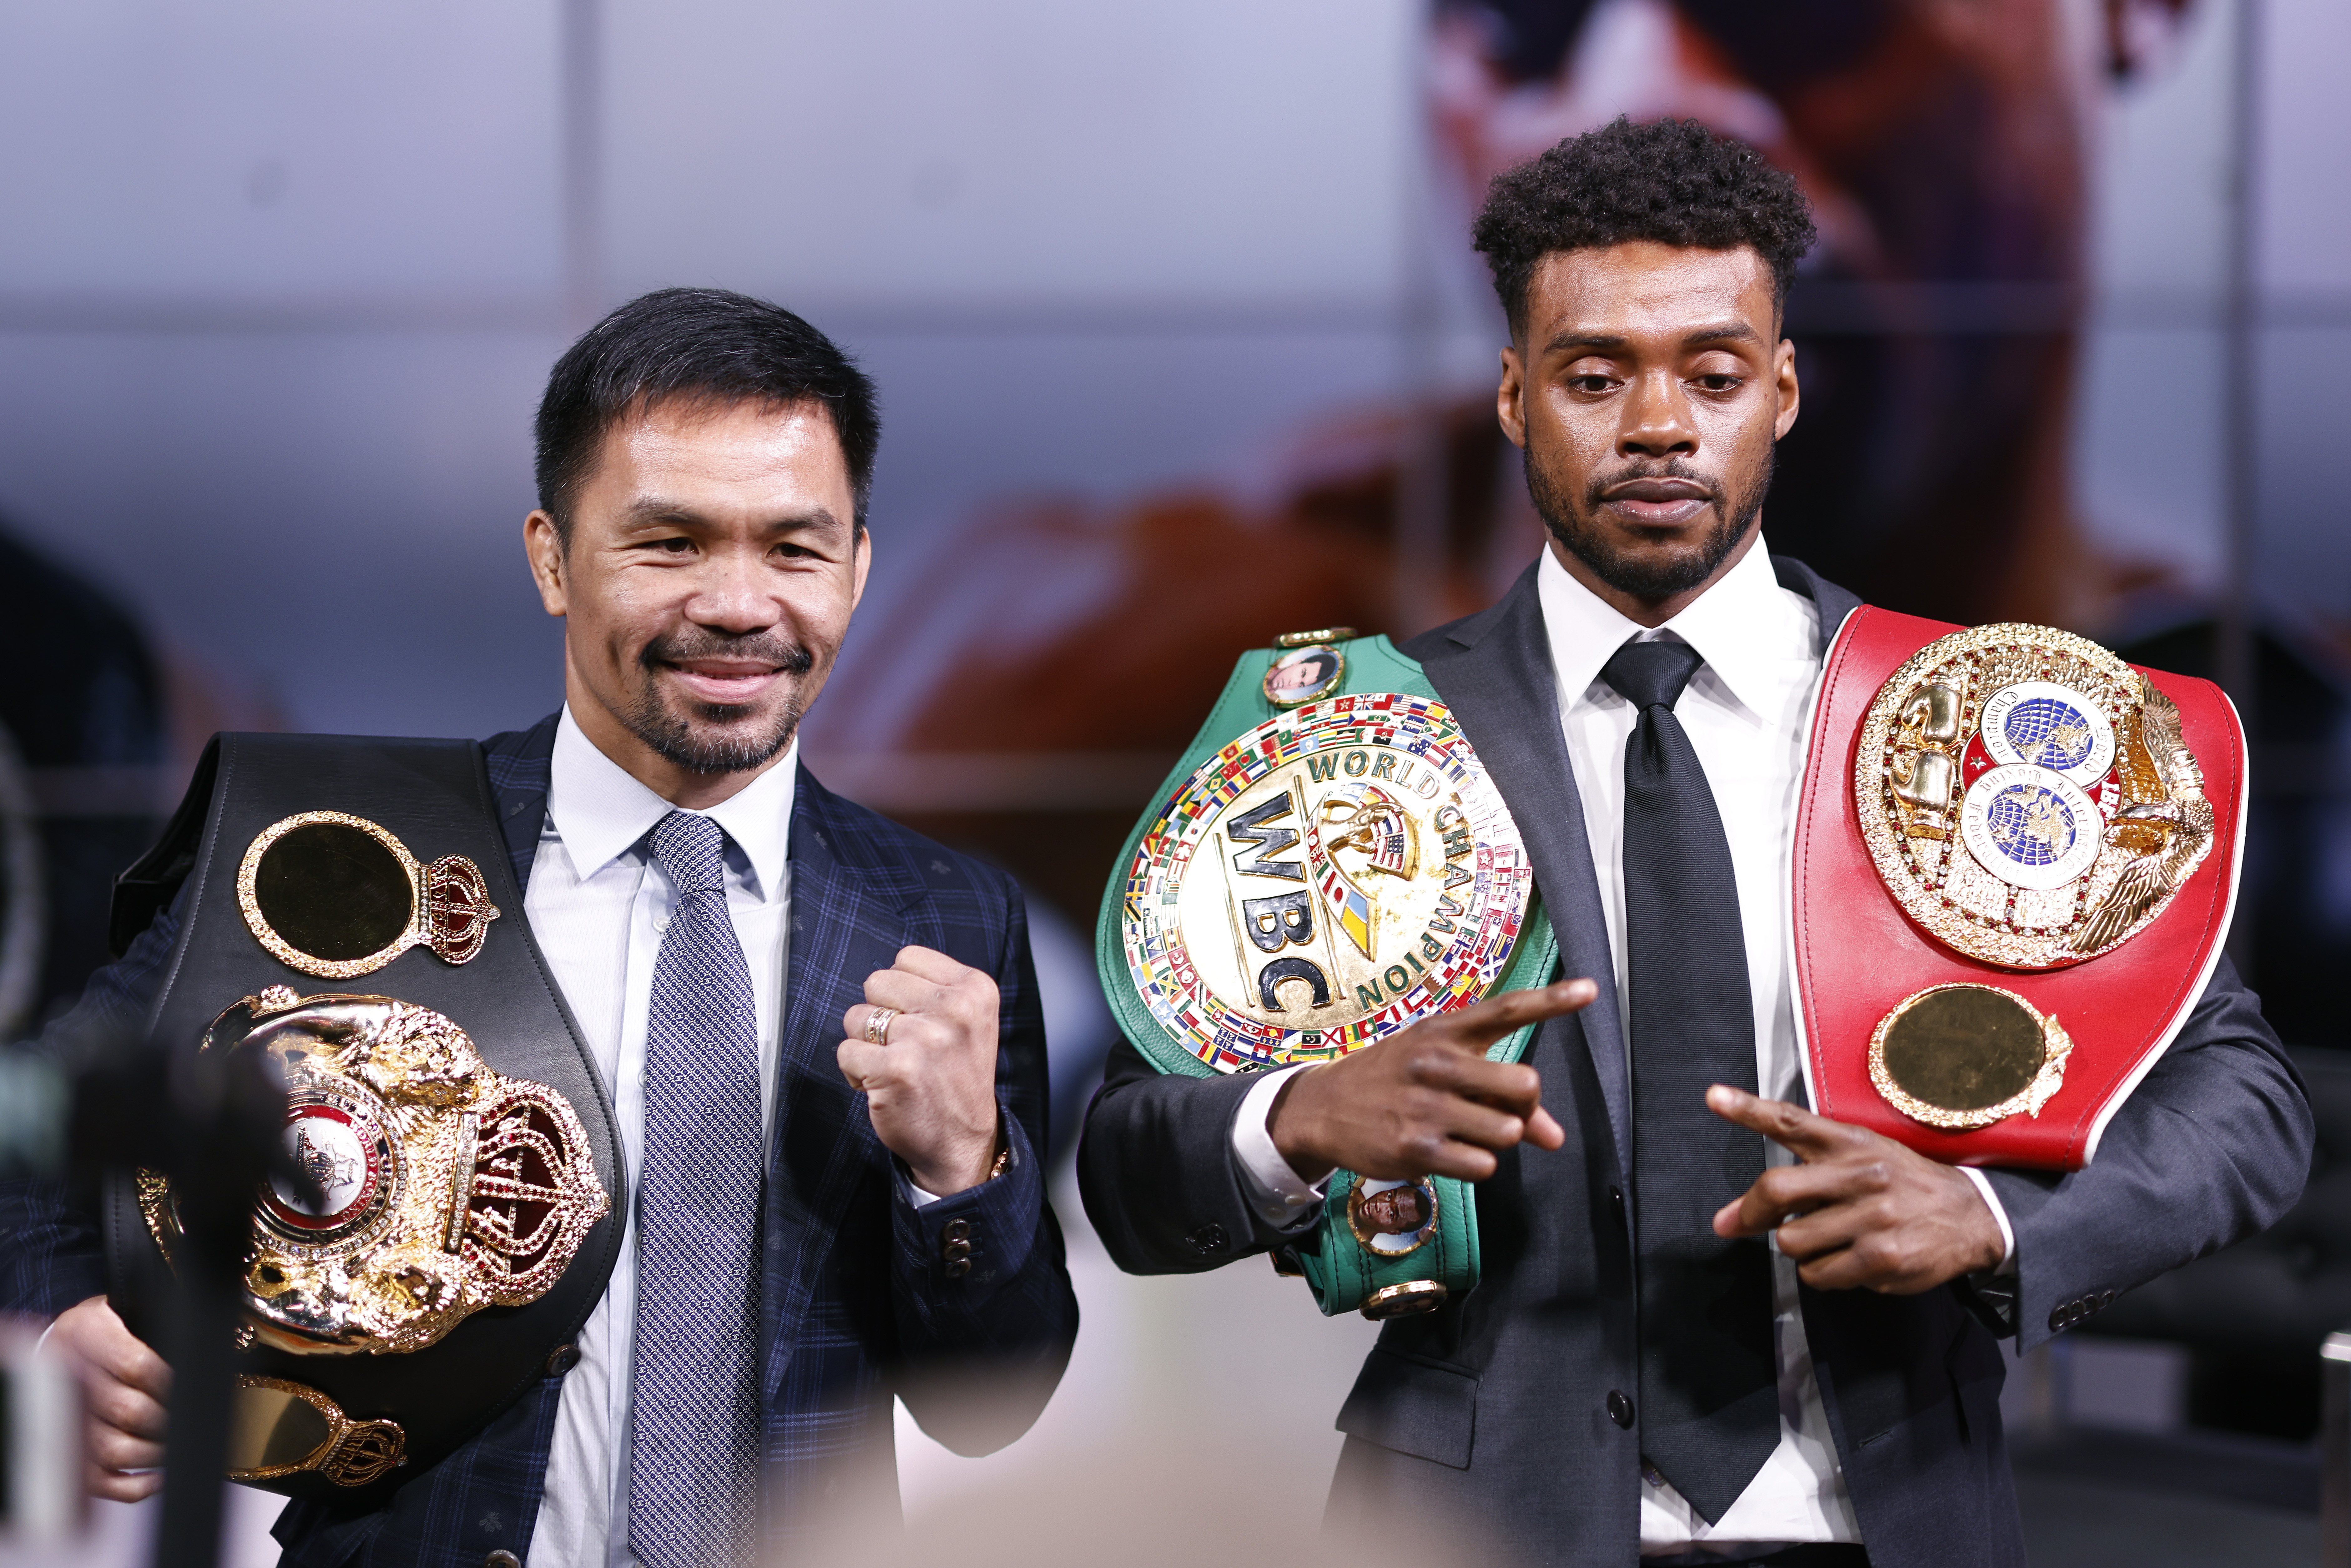 Manny Pacquiao to Fight Yordenis Ugas After Errol Spence Jr